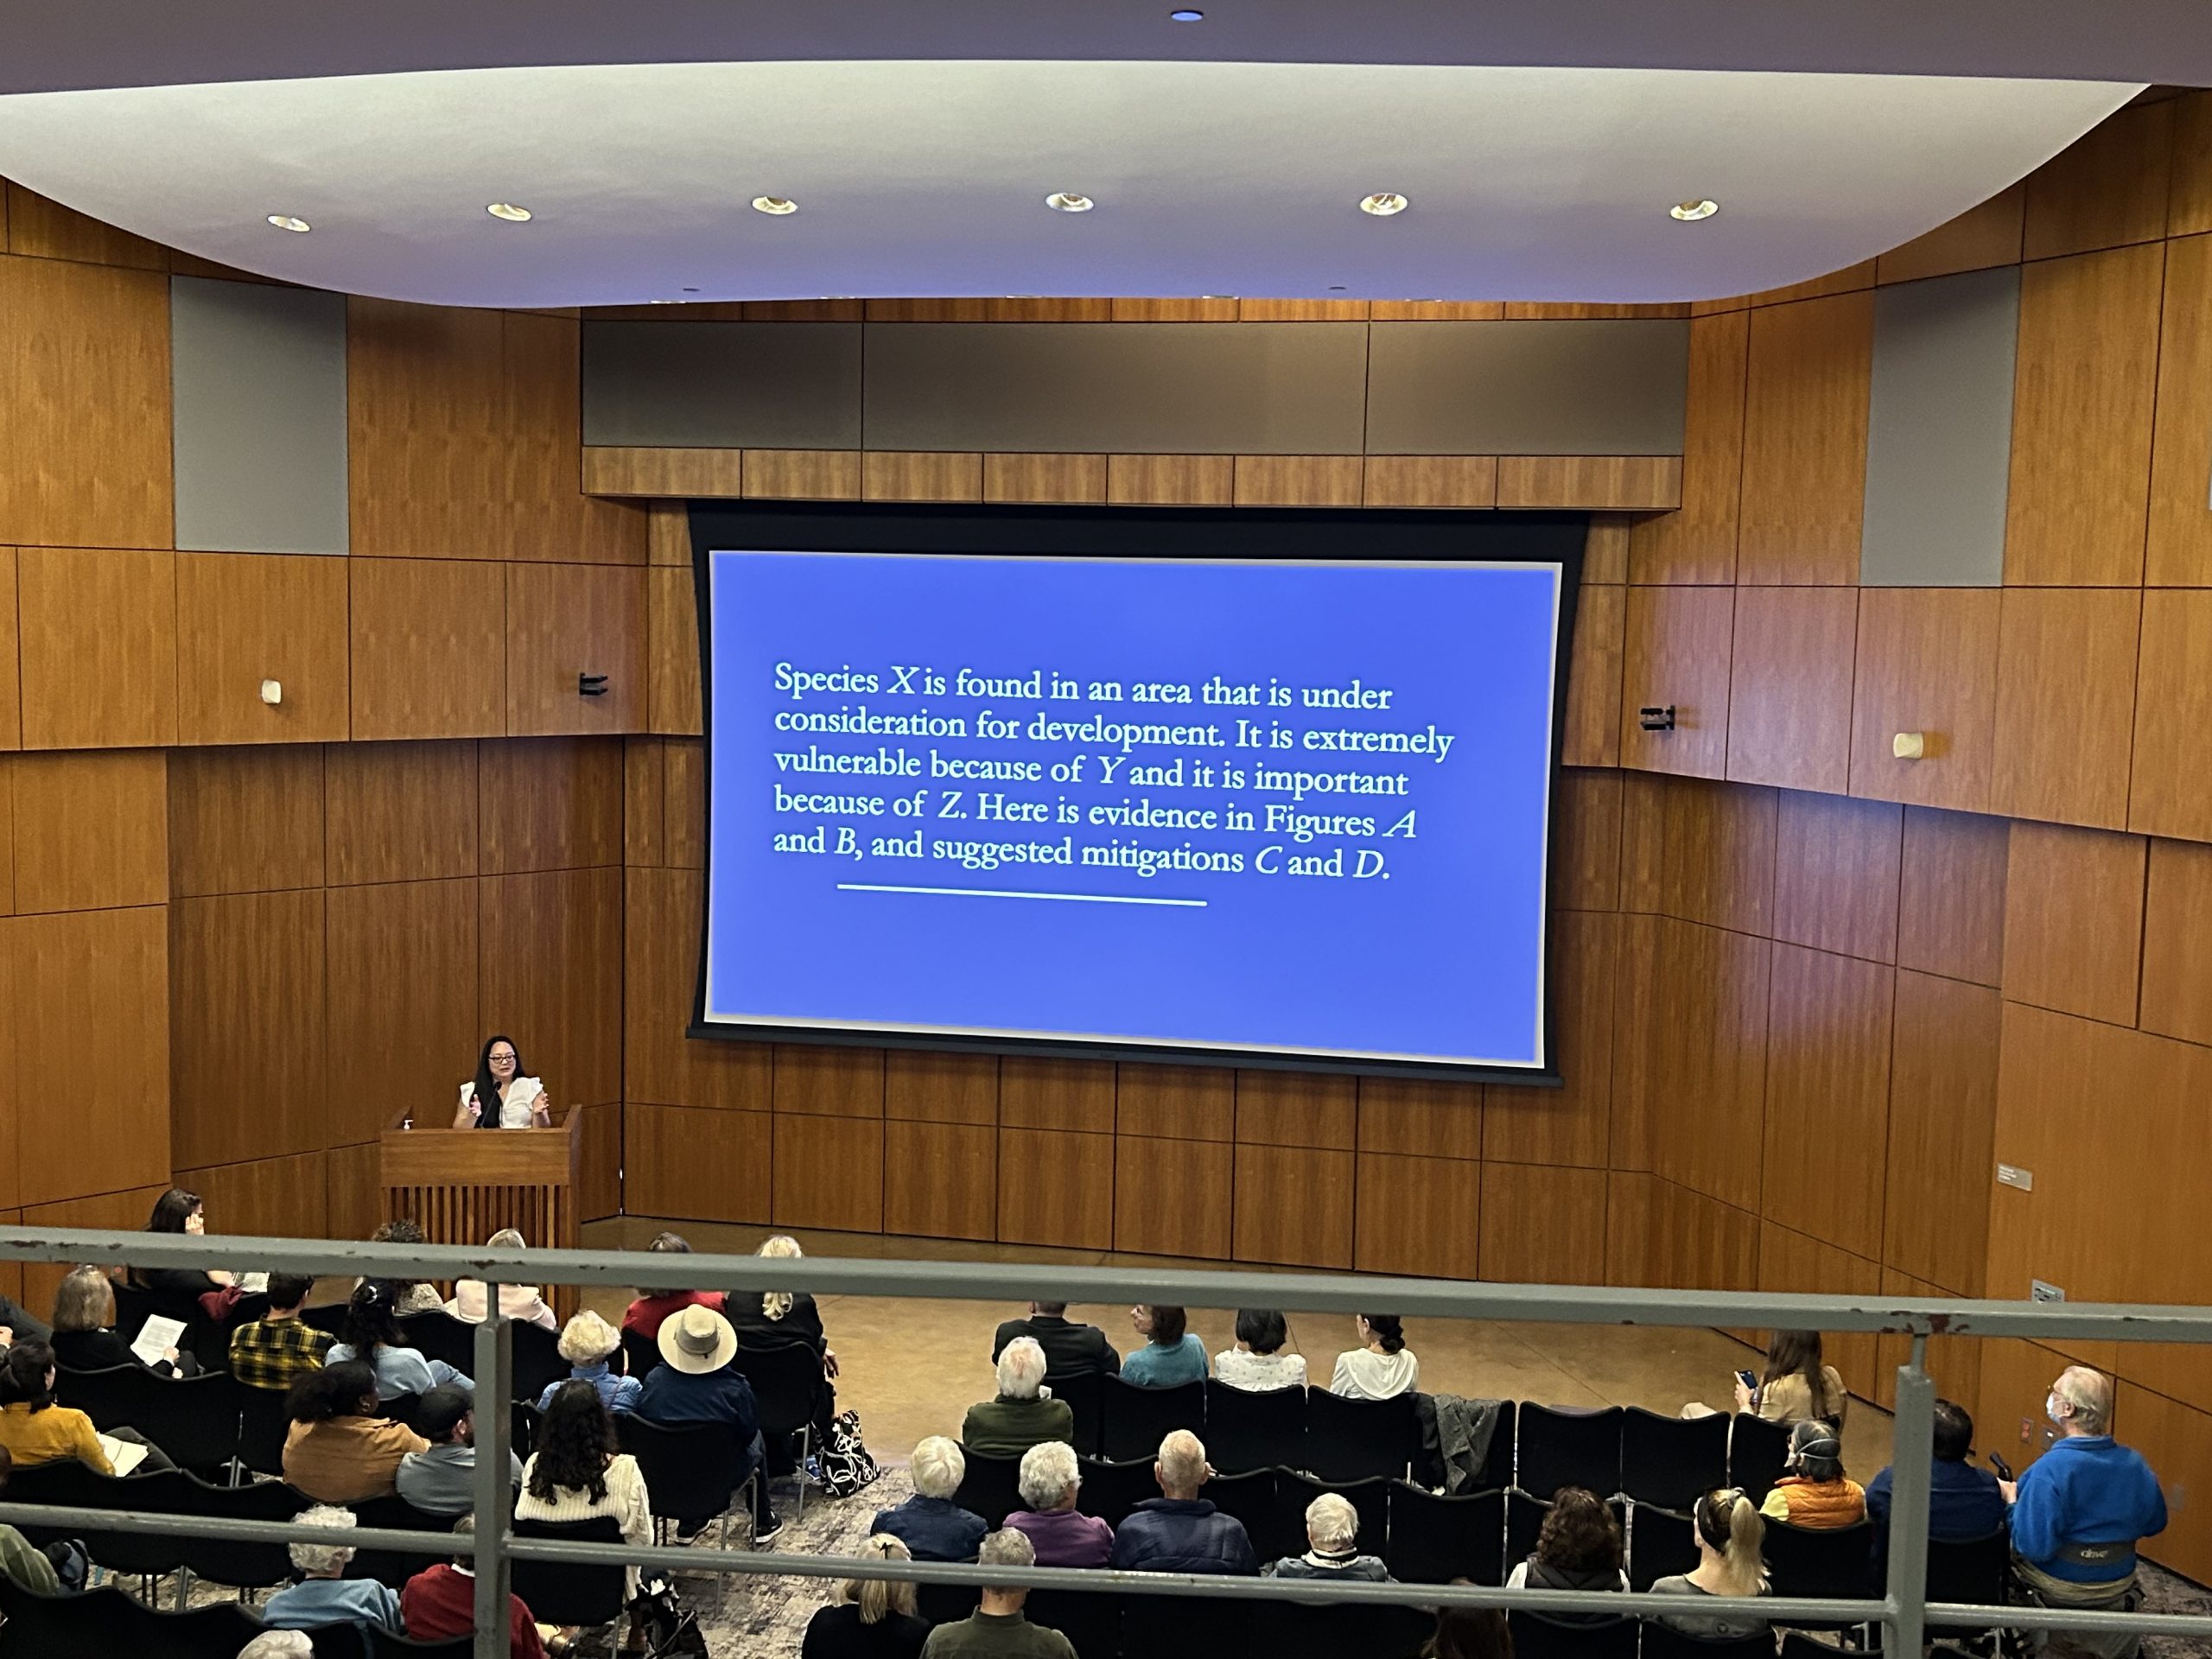 Lecture hall with projector featuring a blue screen and text. A crowd sits in the foreground of the image, and a woman (Dr. Jen Le) located on the lower left of the image is presenting. 